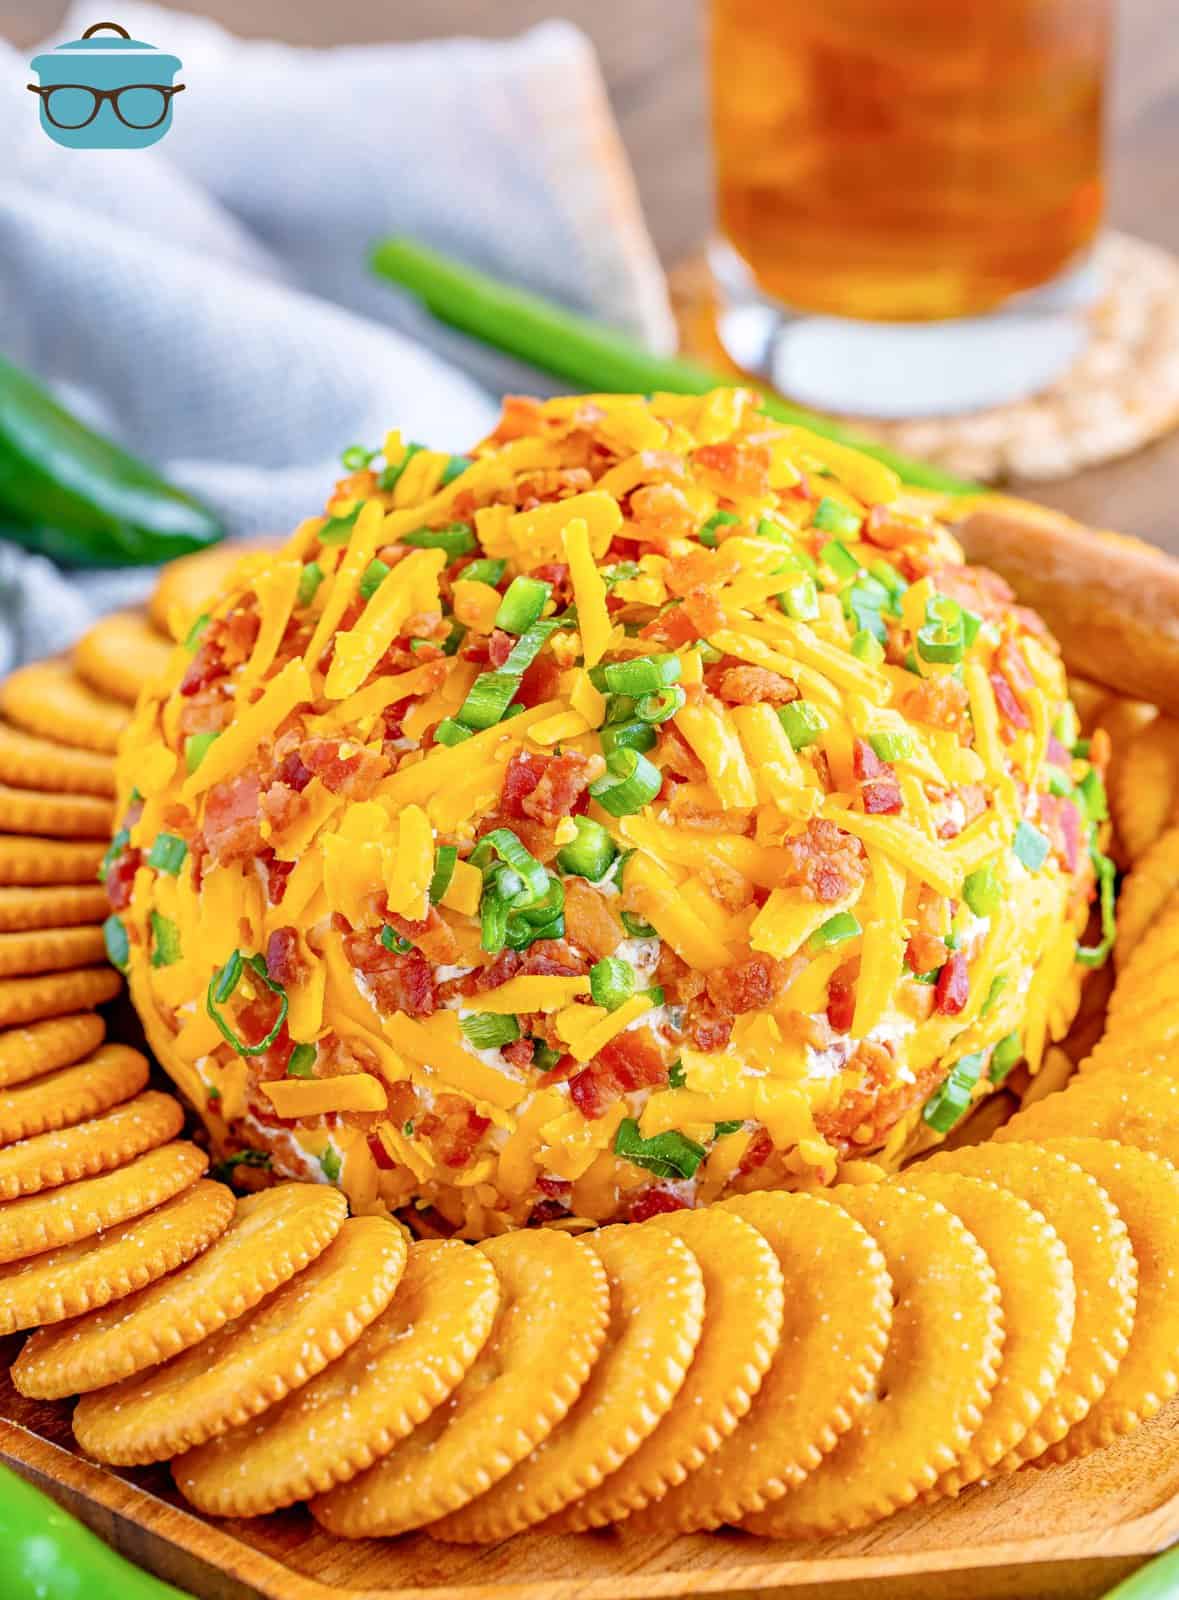 A full ball of Jalapeno Popper Cheeseball with a ring of crackers around it.